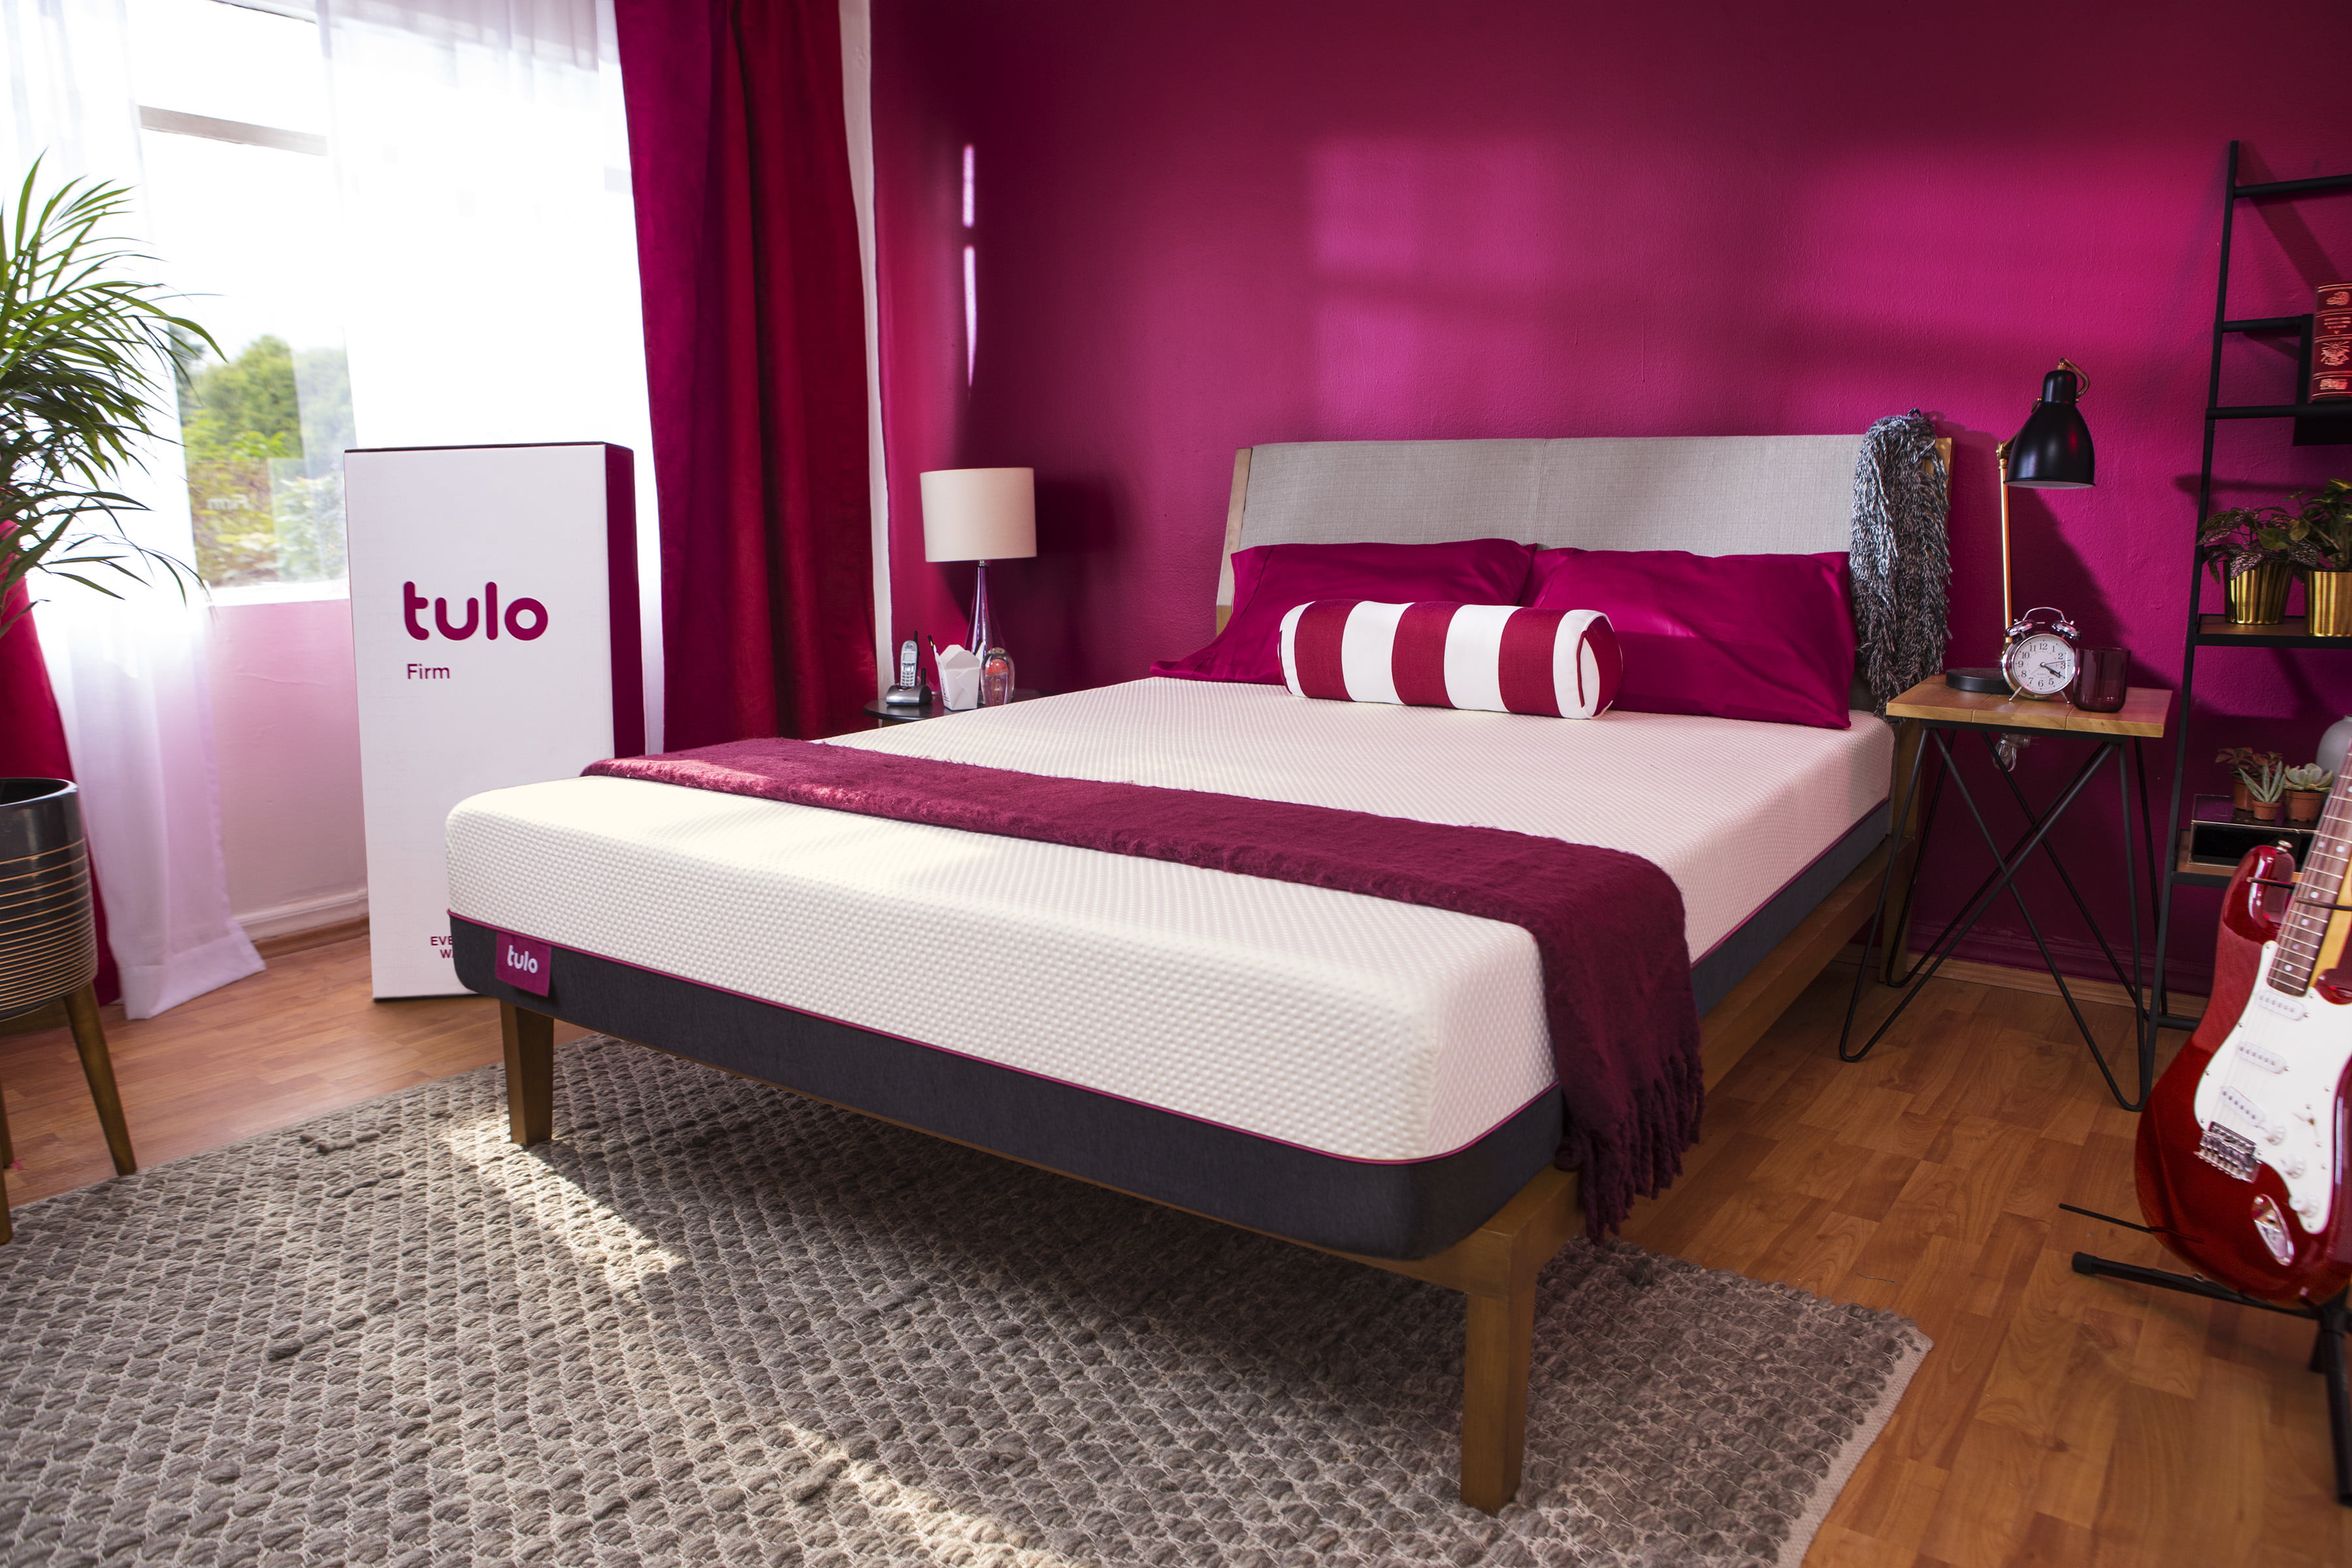 Tulo Bed Review with Ratings and Coupon